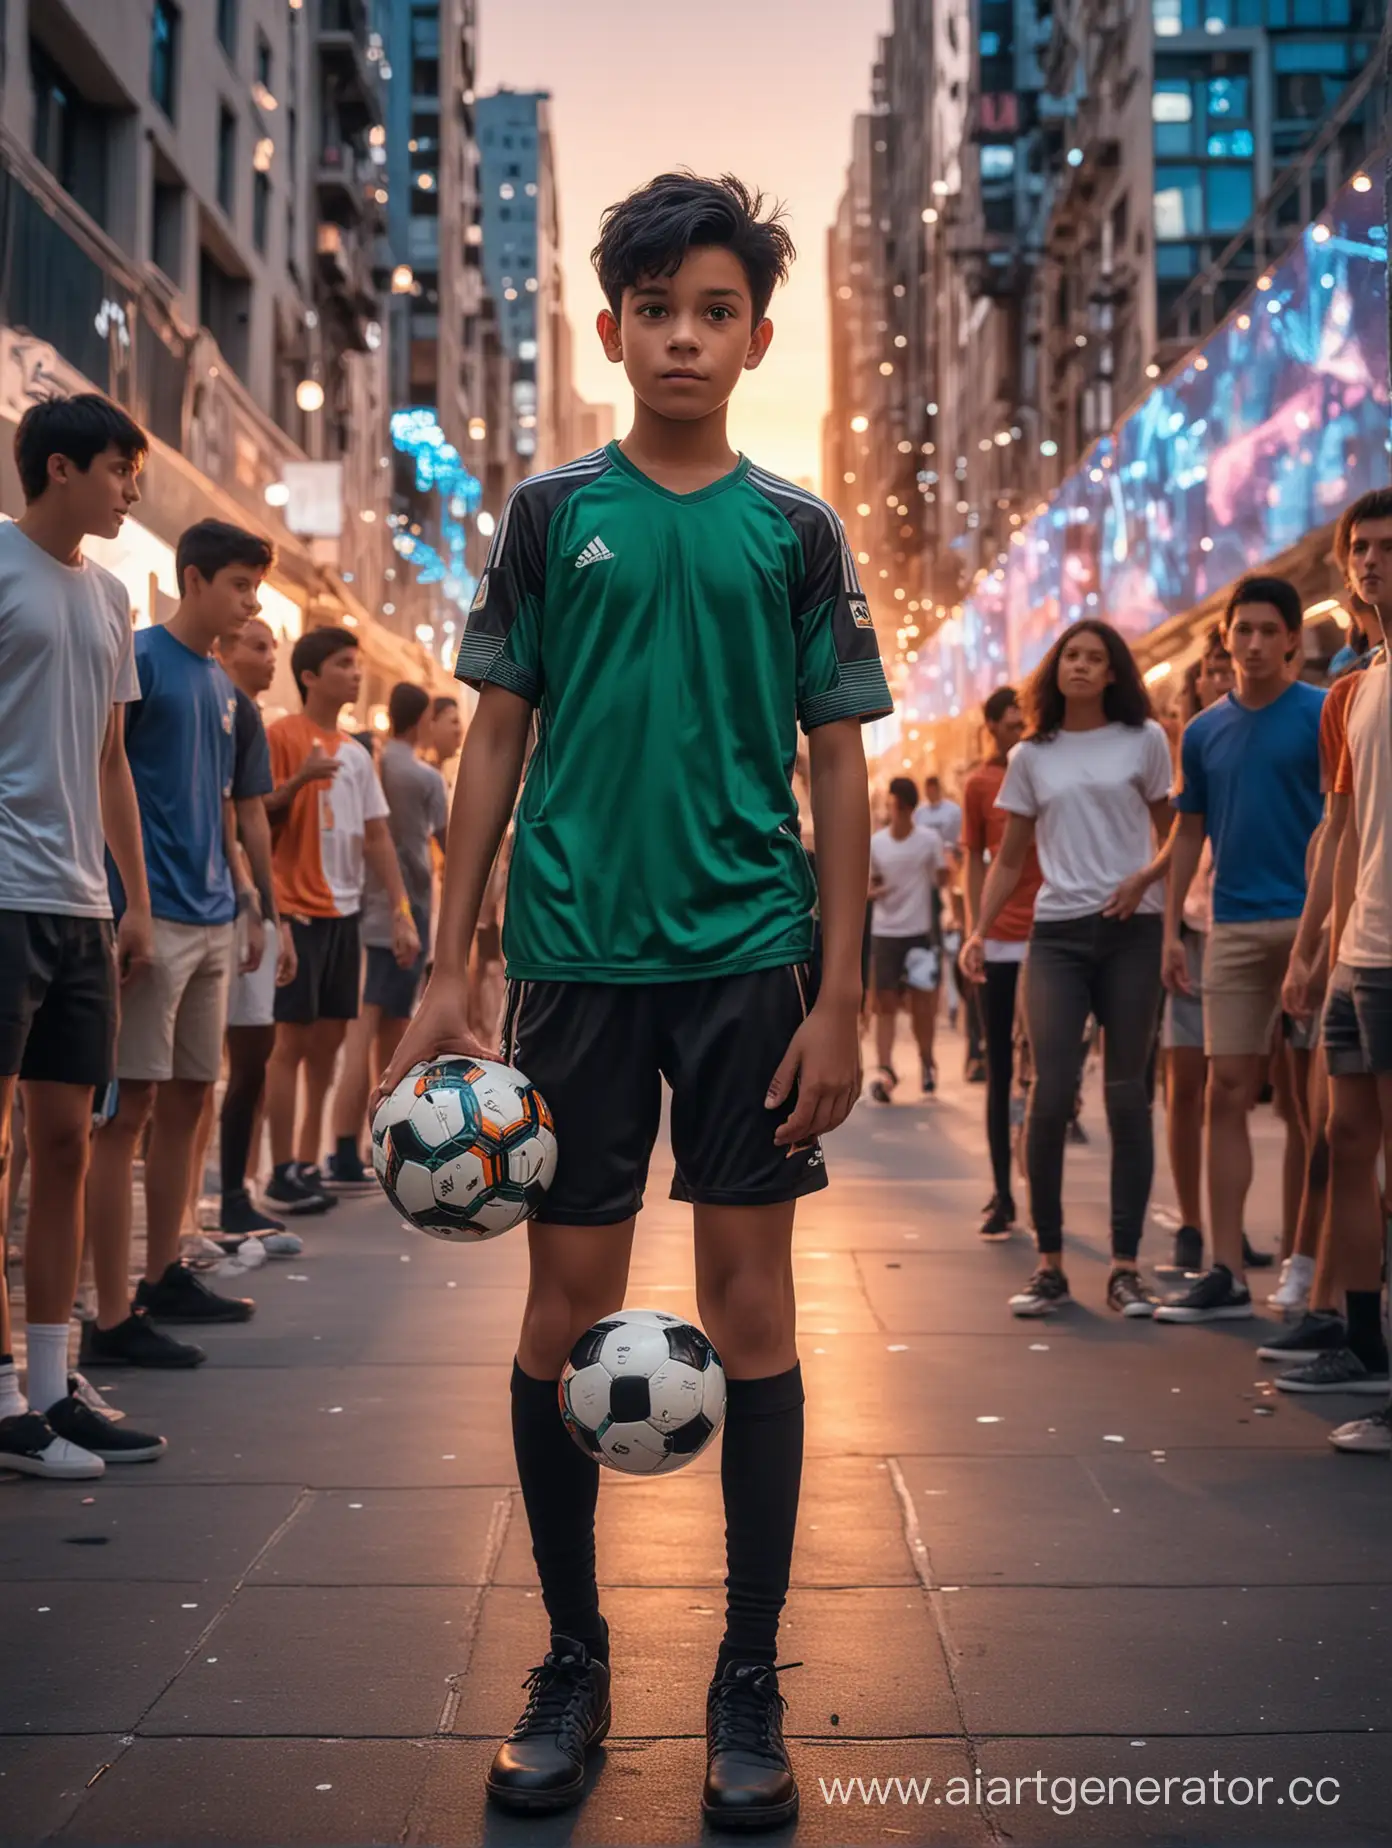 Talented-Teen-Soccer-Player-Surrounded-by-Futuristic-City-Lights